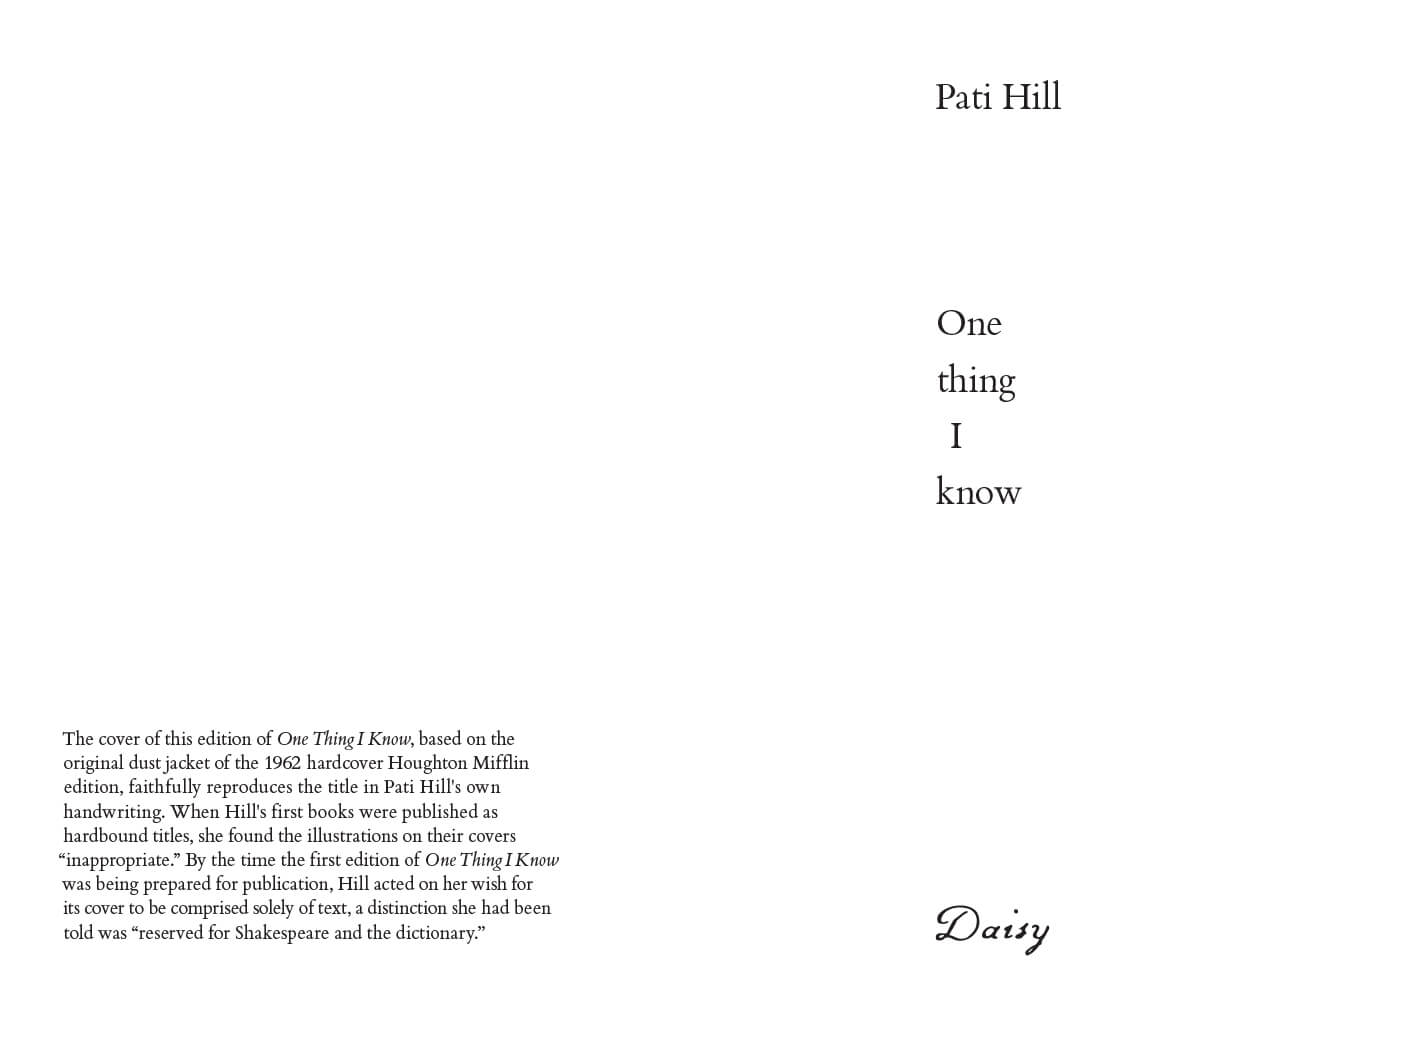 One-thing-I-know-pati-hill-daisy-visuel-1